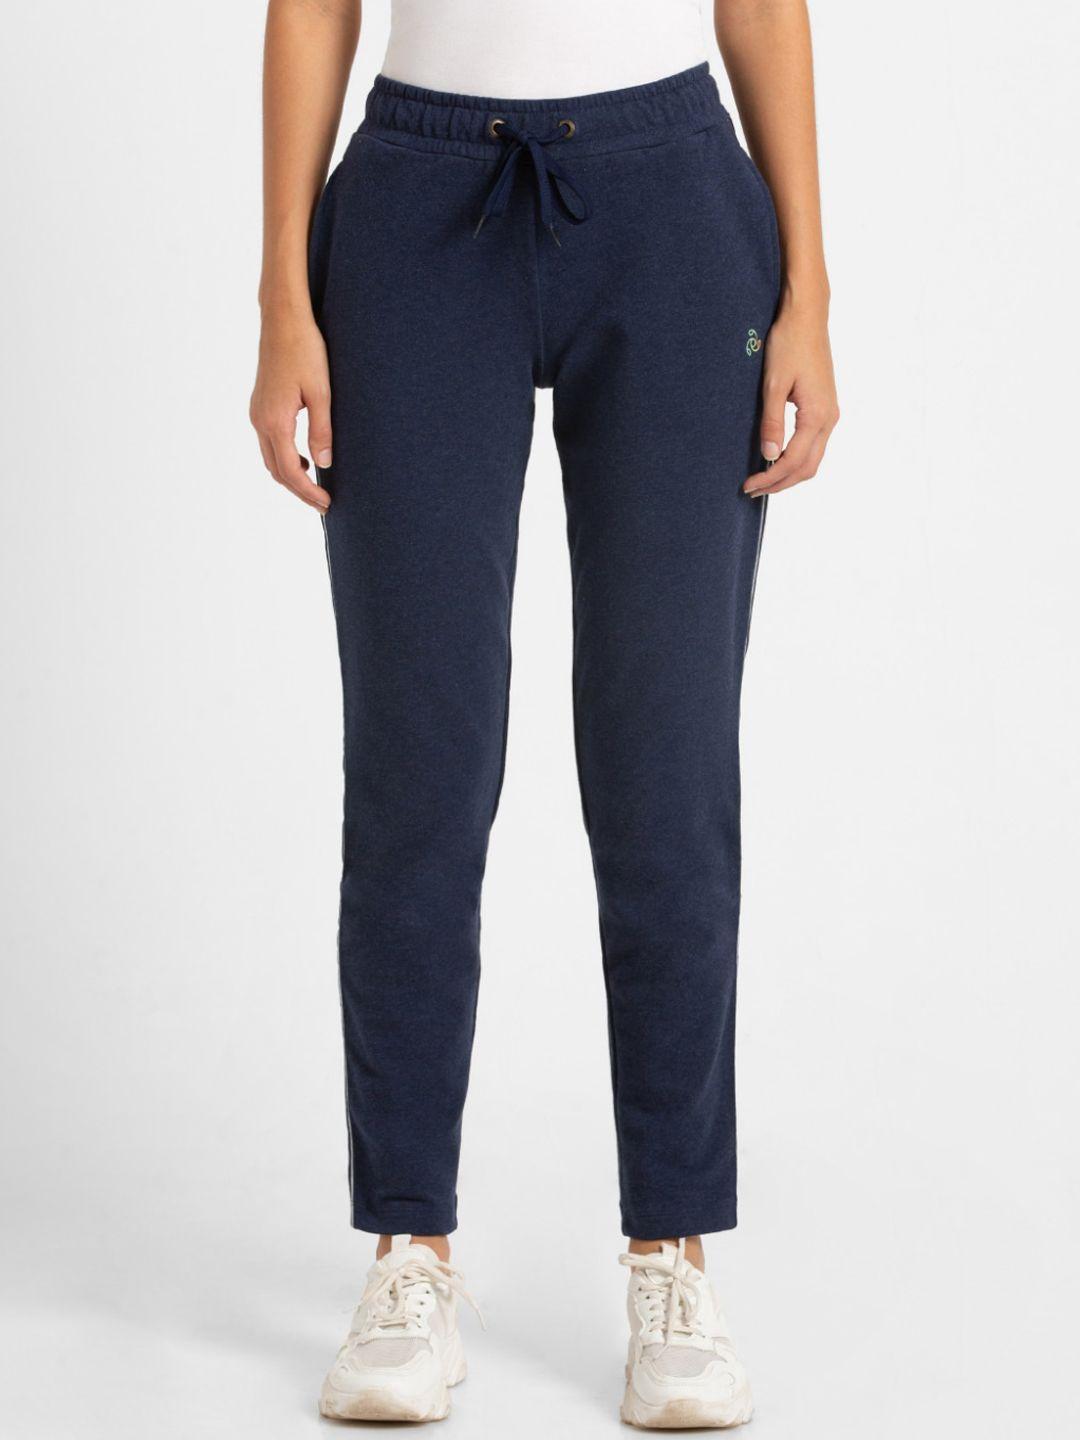 jockey-women-plus-size-navy-blue-solid-straight-fit-pure-cotton-winter-cropped-track-pant